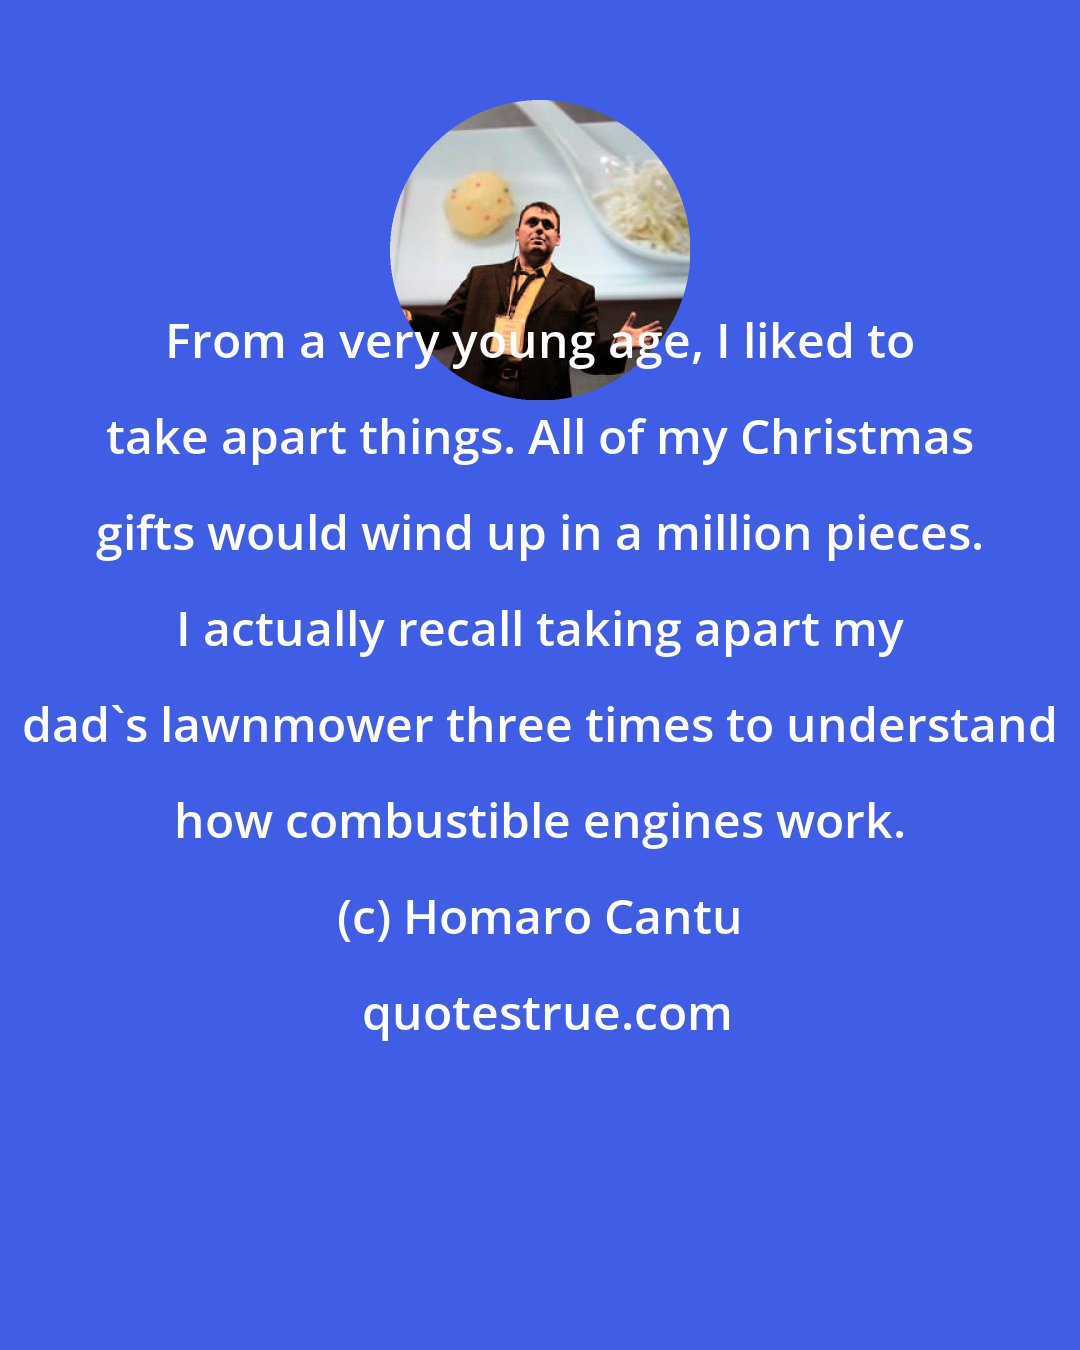 Homaro Cantu: From a very young age, I liked to take apart things. All of my Christmas gifts would wind up in a million pieces. I actually recall taking apart my dad's lawnmower three times to understand how combustible engines work.